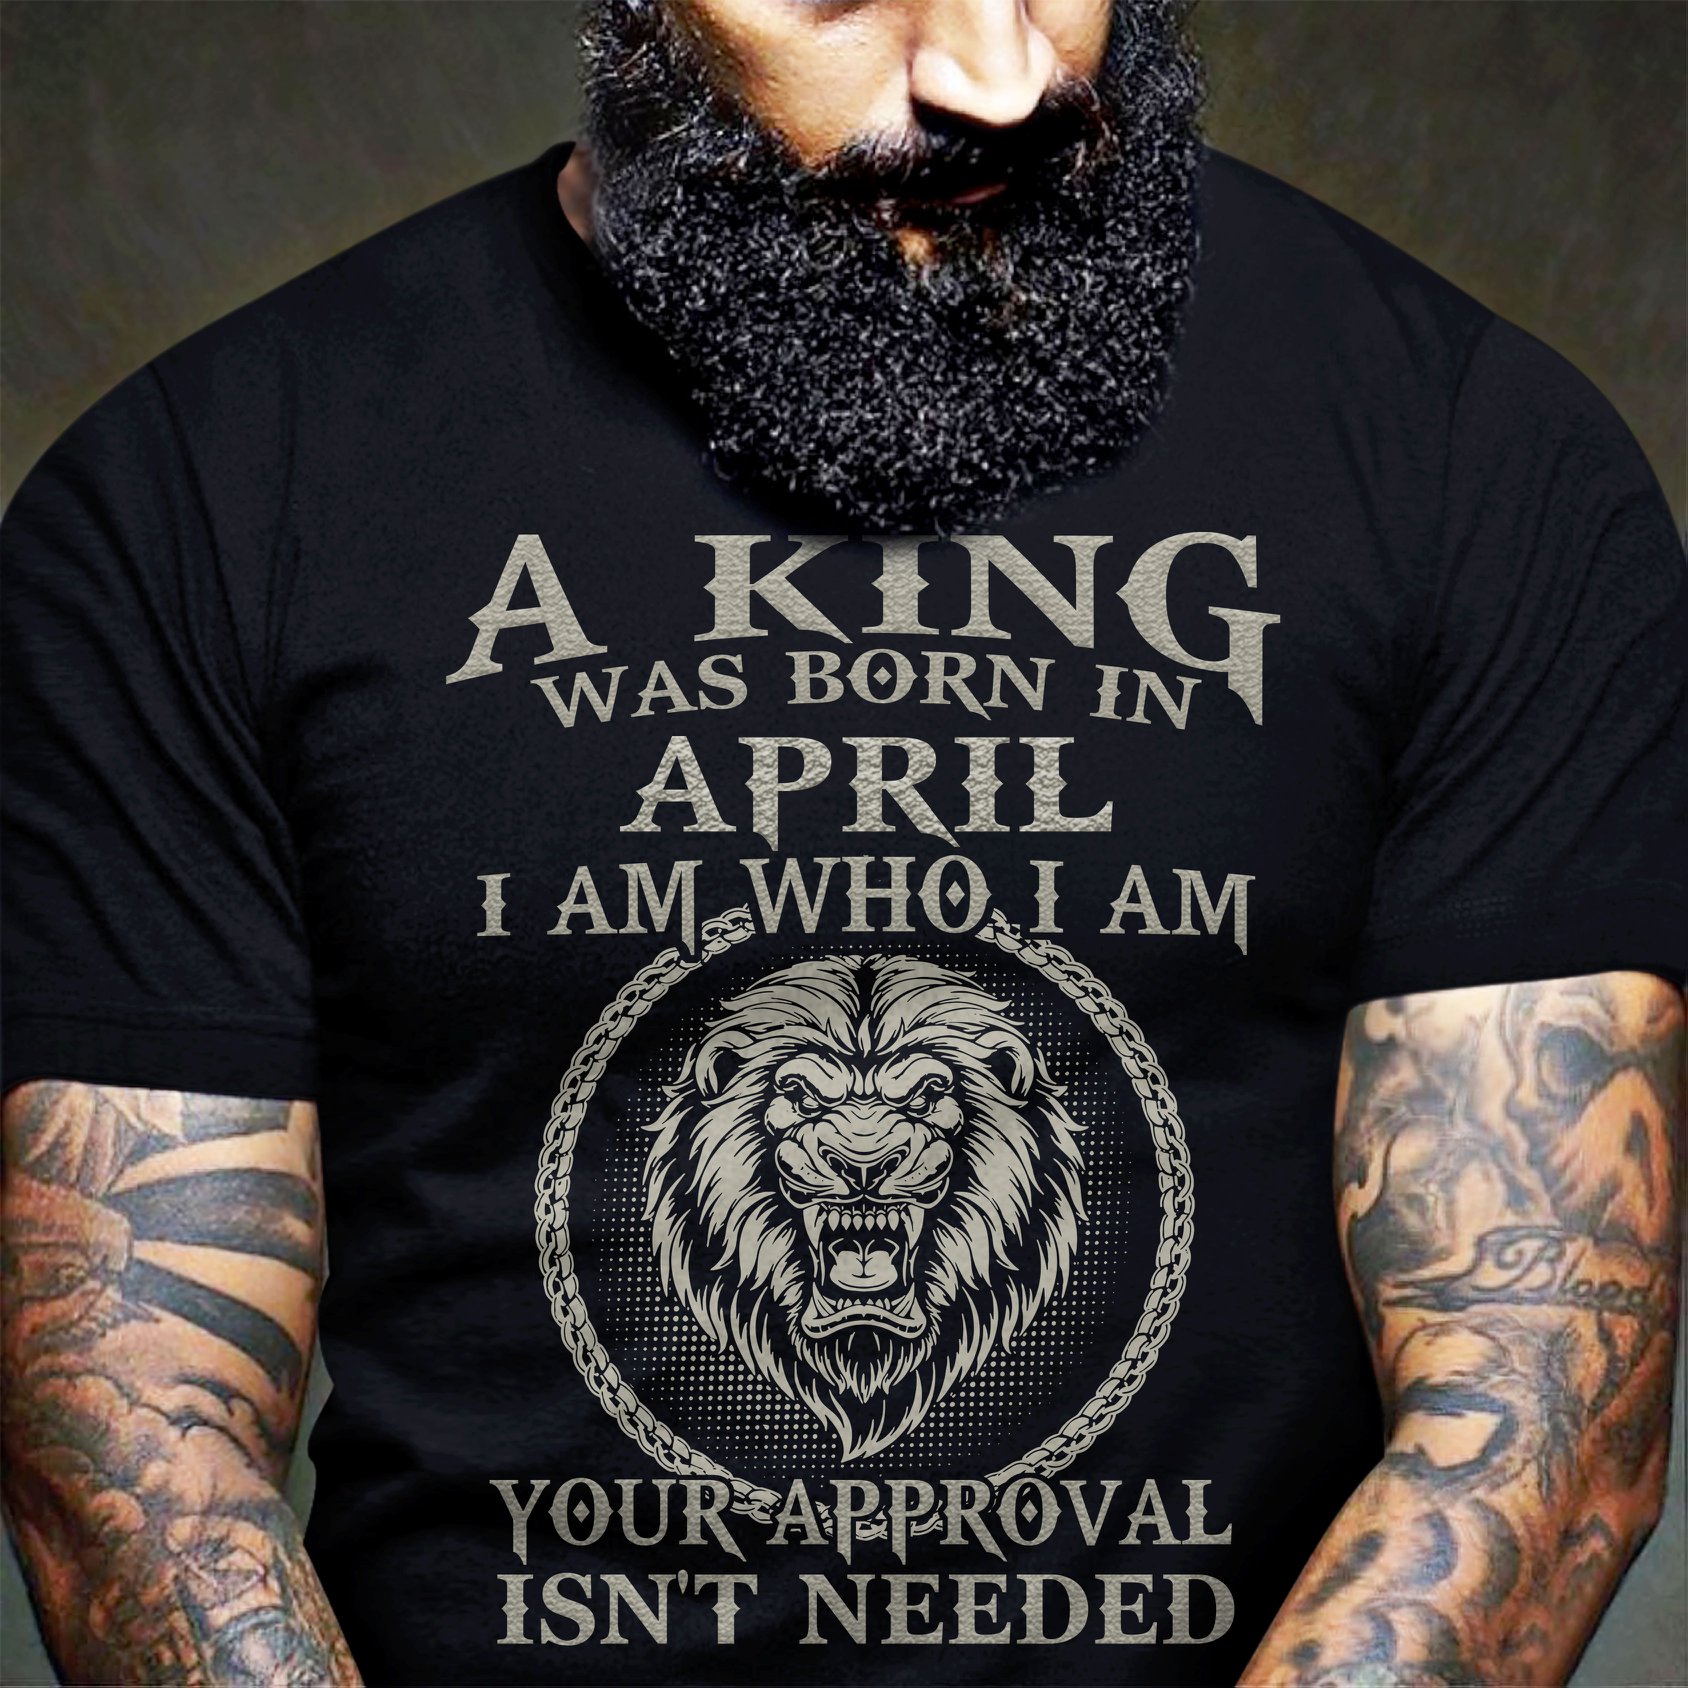 A king was born in april I am who I am